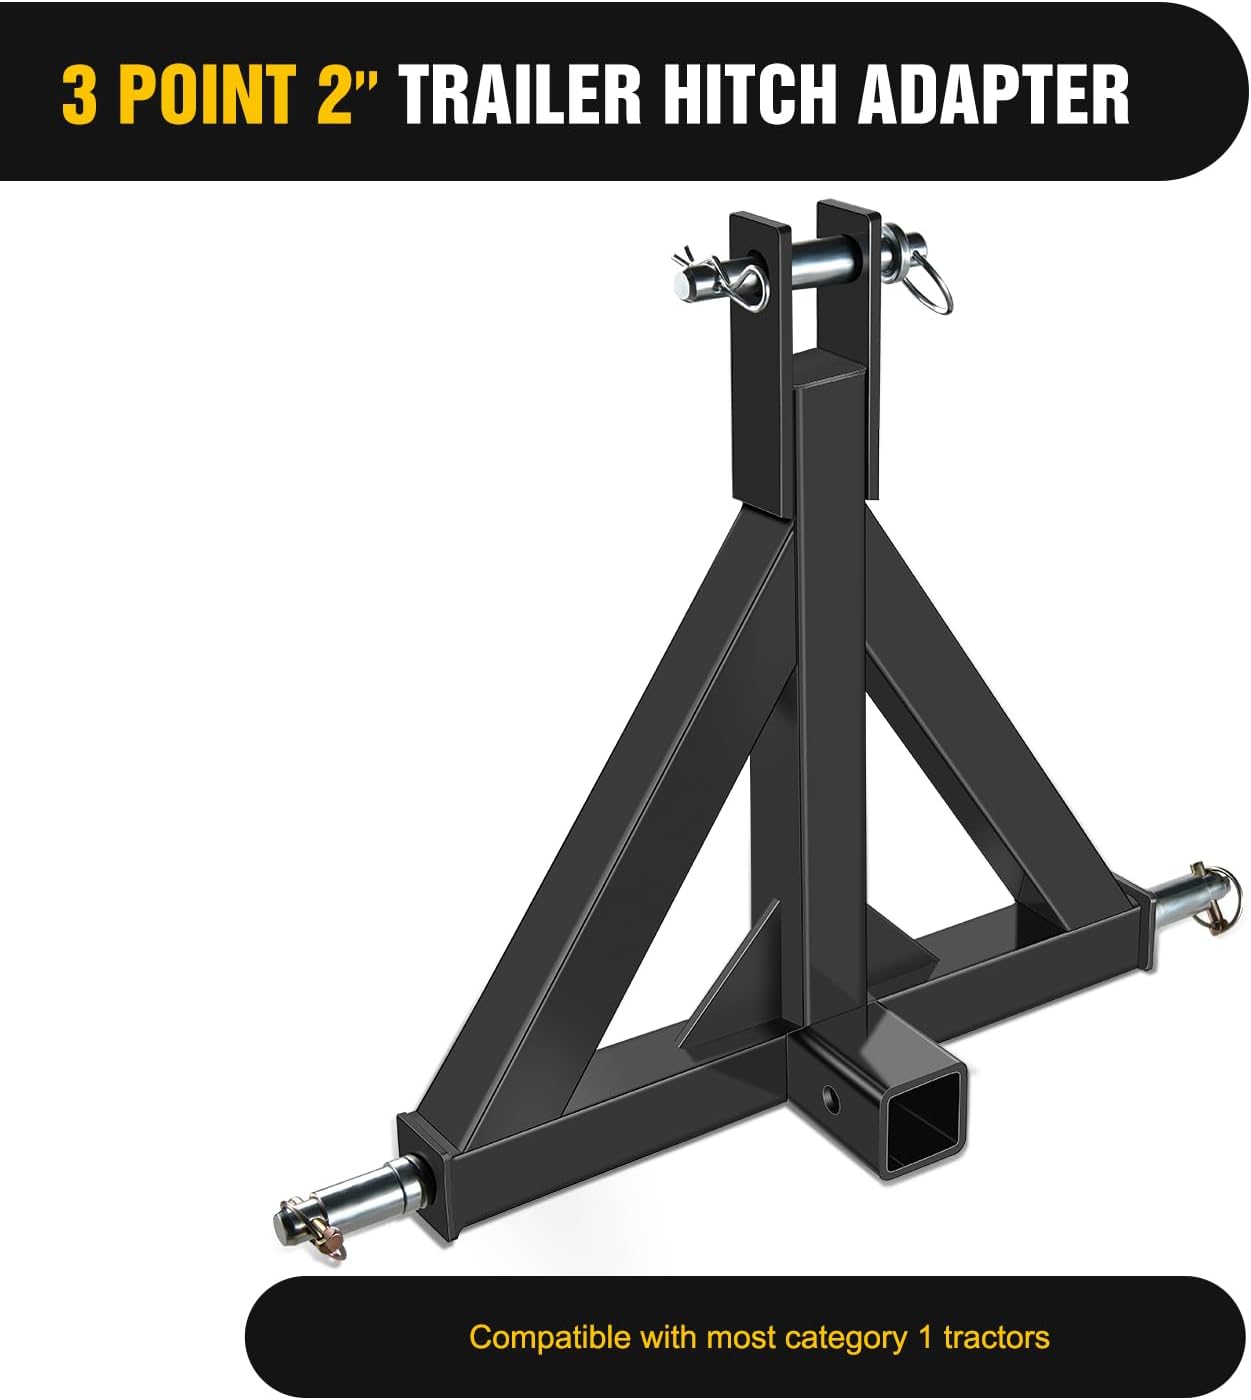 3 Point 2" Trailer Hitch Kit For Category 1 Heavy Duty Tractor Nilight